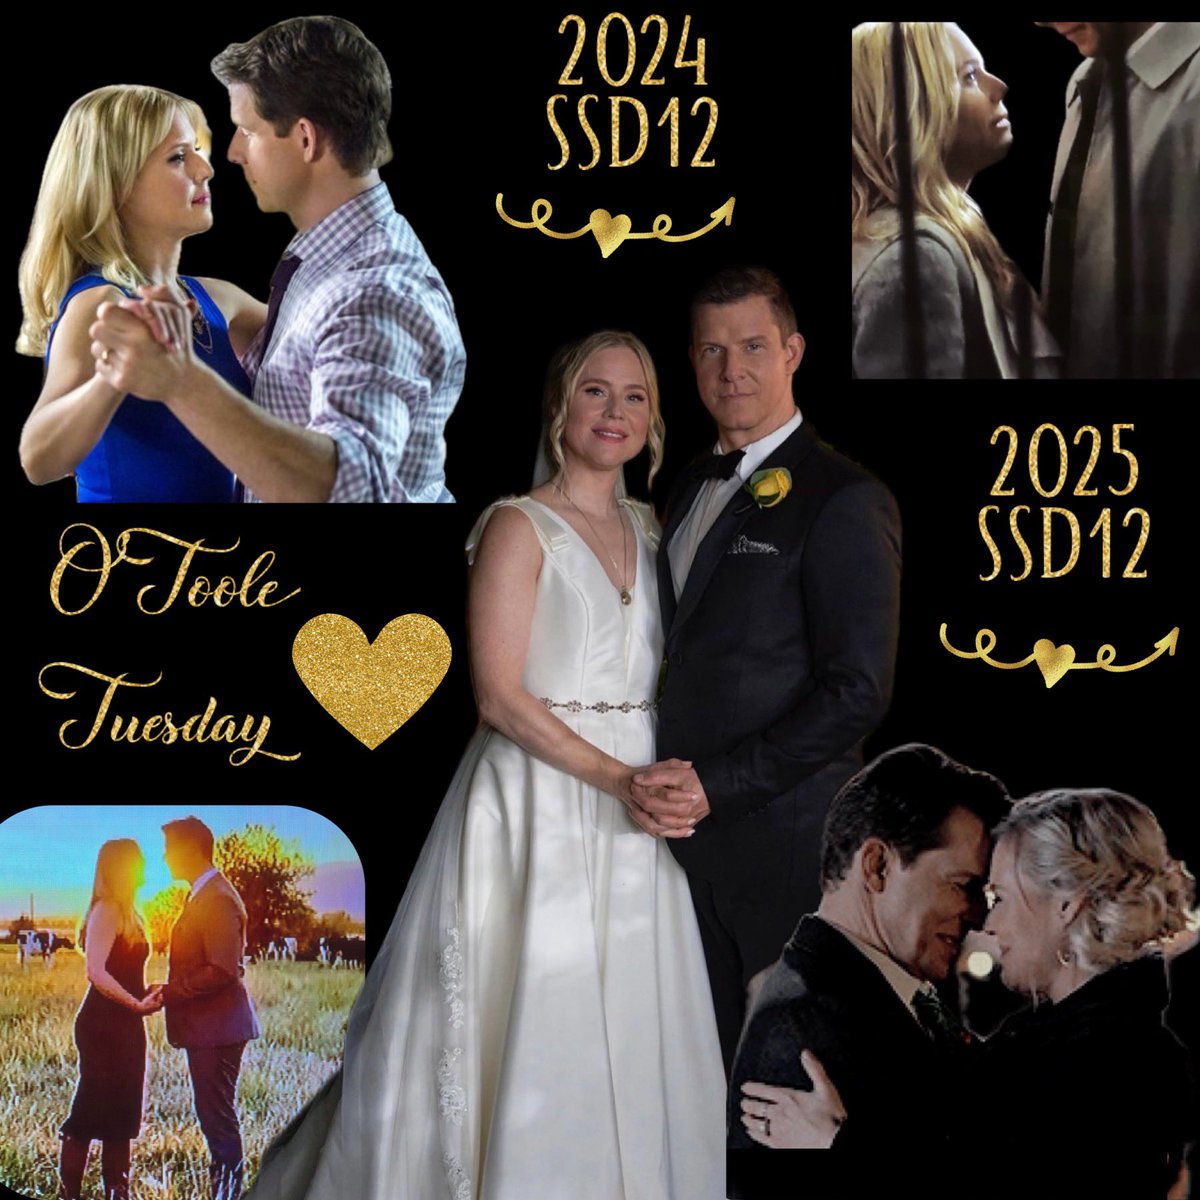 It’s #OTooleTuesday one of our favorites days💙 The filming of #SSD12 & #SSD13 is winding down 💙 Wanted to remember a few of the favorites before we see Mr & Mrs O’Toole make their appearance later…. @Eric_Mabius @kristintbooth #LisaHamiltonDaly #POstables